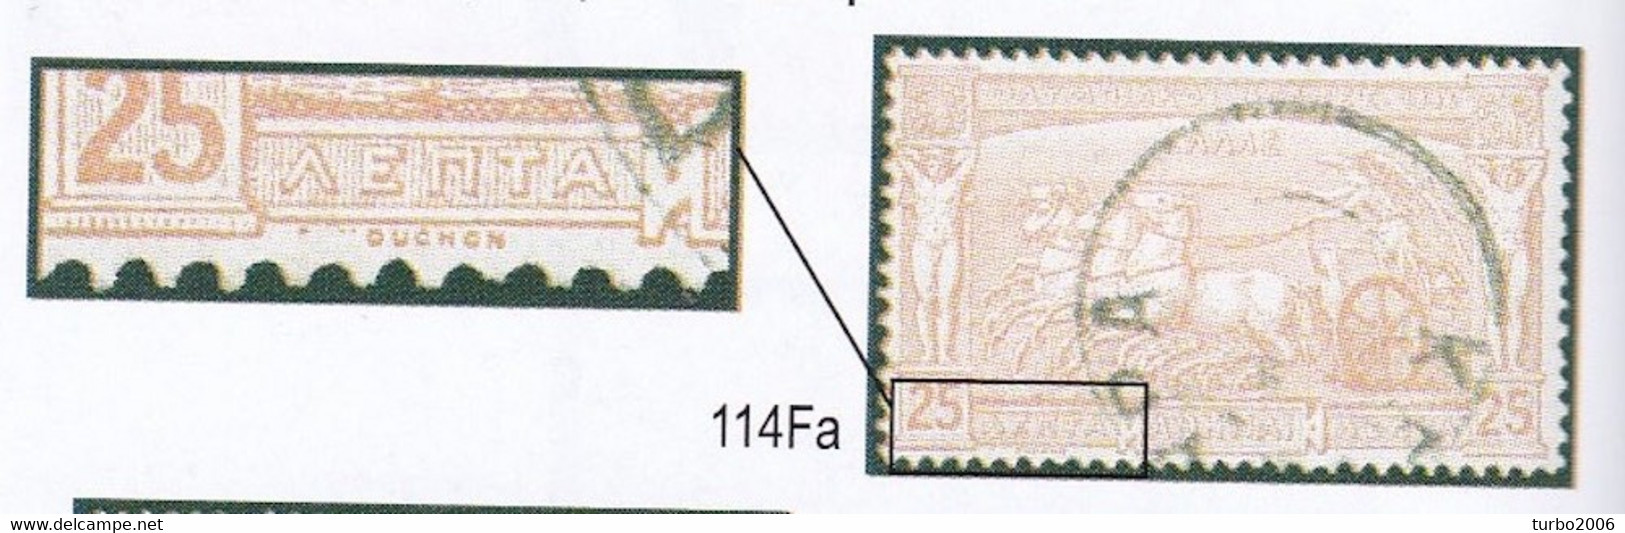 GREECE 1896 First Olympic Games 25 L Red Vl. 138 PLATEFLAW  ..OUCHON (Hellas 114 Fa) - Plaatfouten En Curiosa